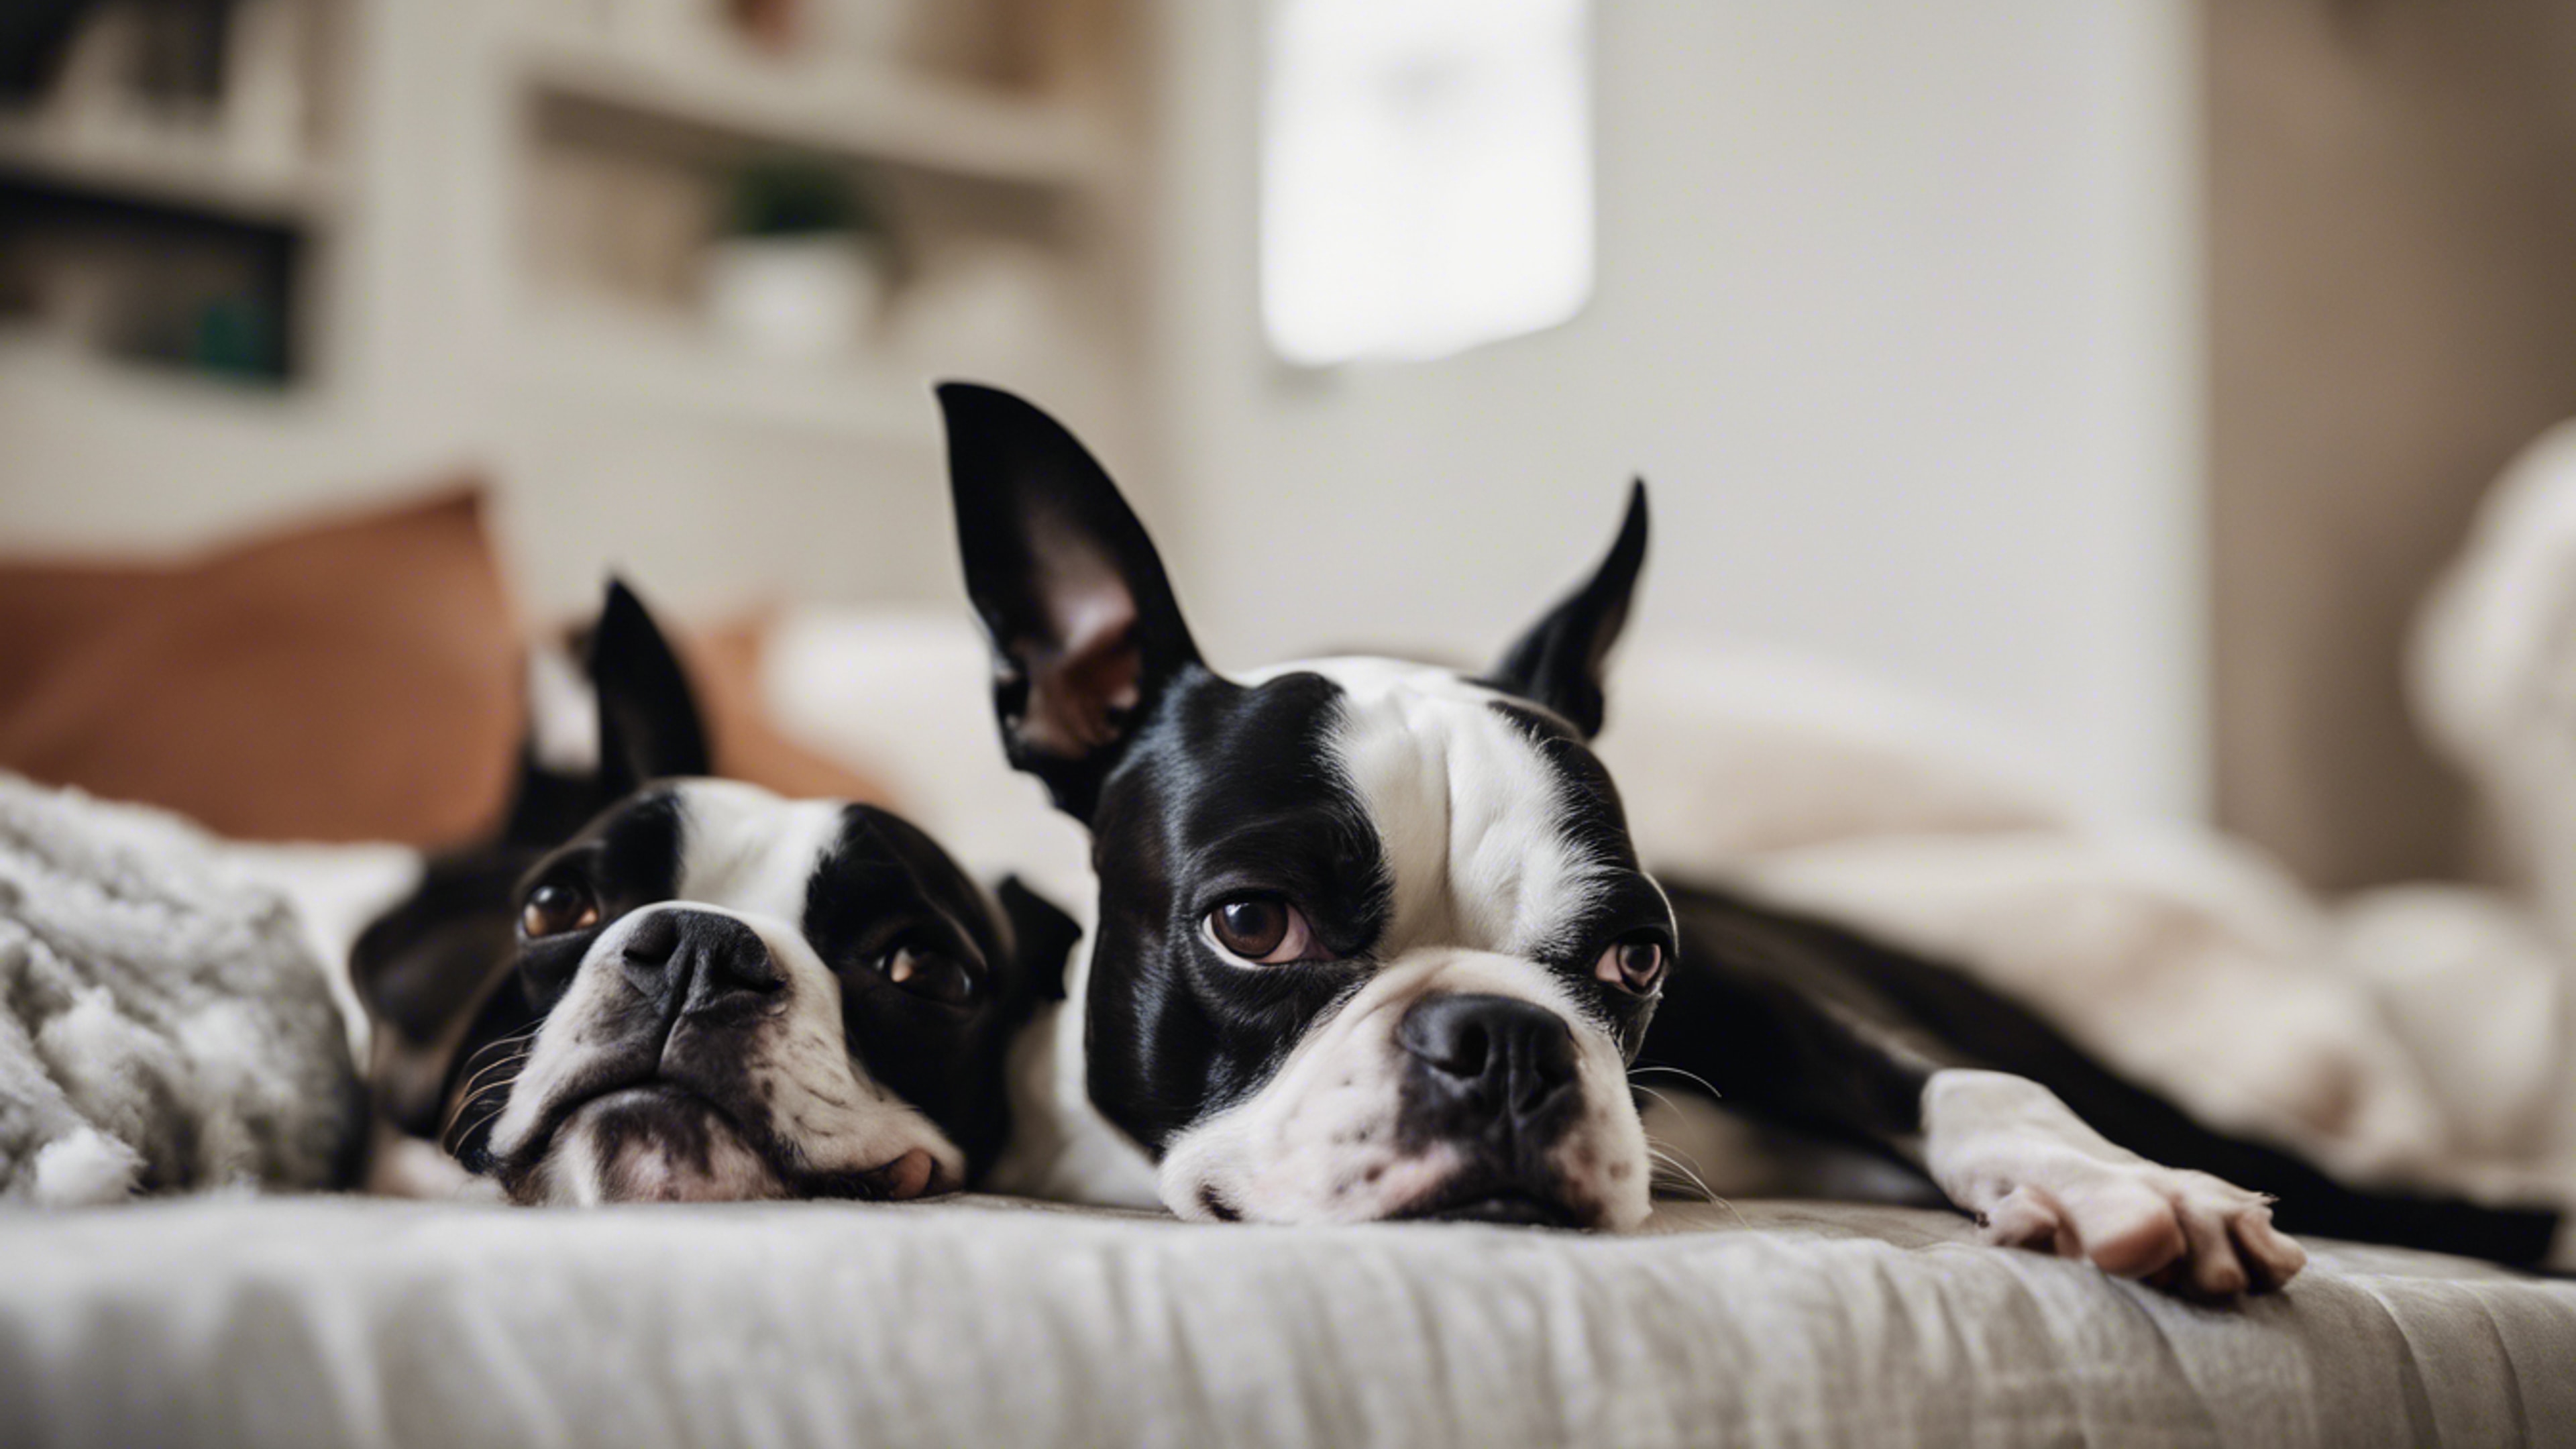 Two Boston Terriers laying comfortably on their sides, dozing away the afternoon in a suburban home. Tapeta[f1fad920e9554f308ac1]